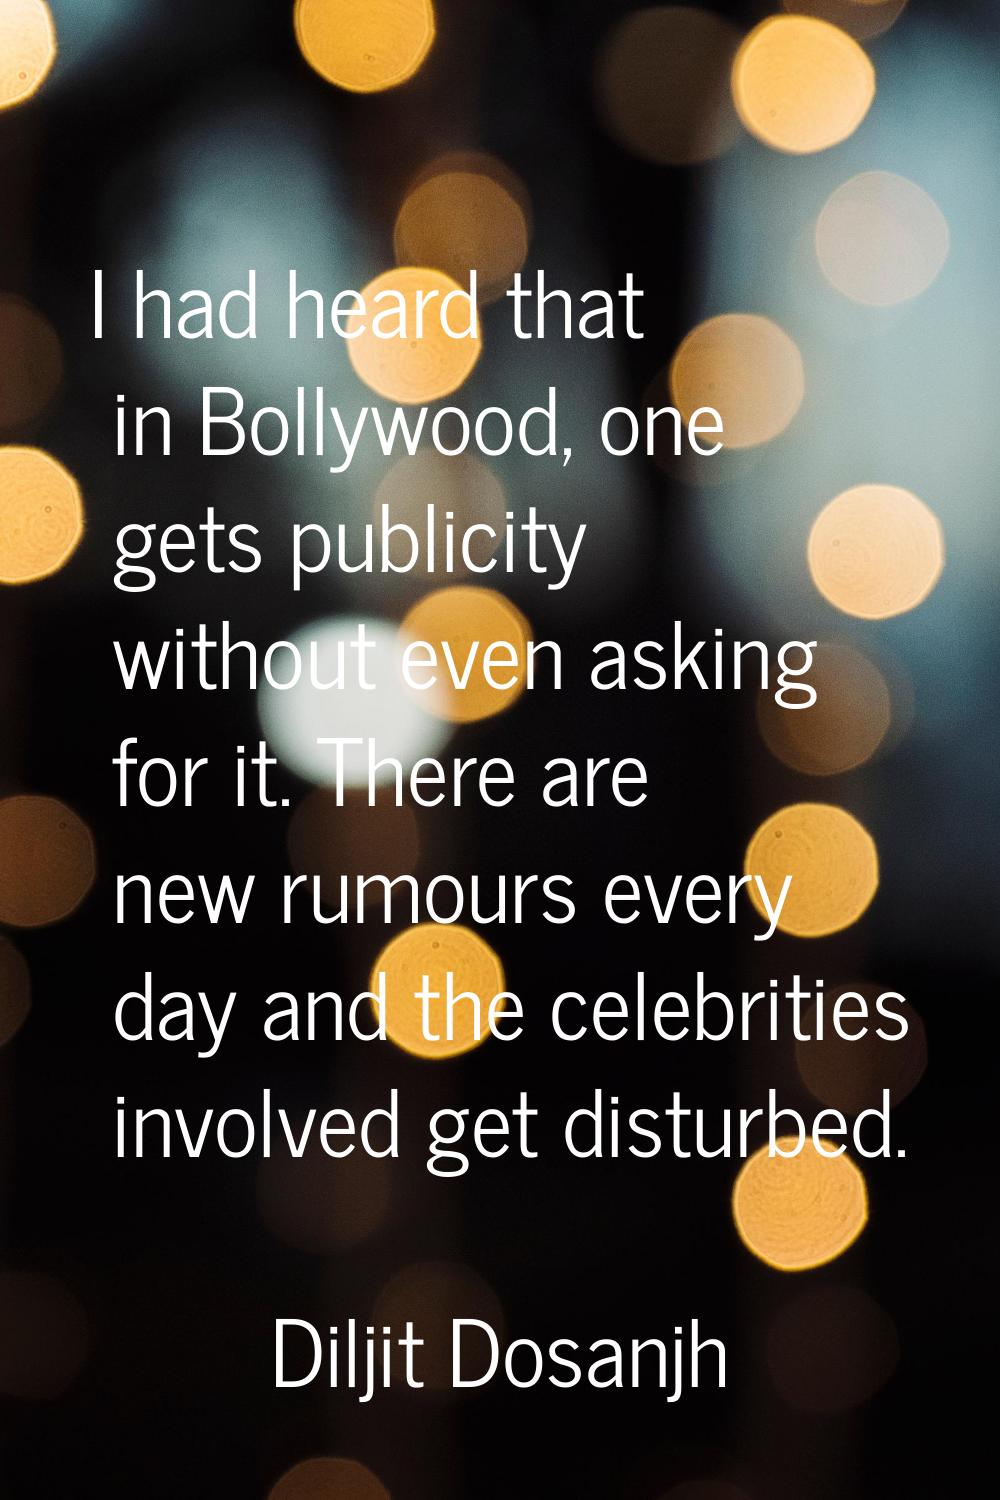 I had heard that in Bollywood, one gets publicity without even asking for it. There are new rumours